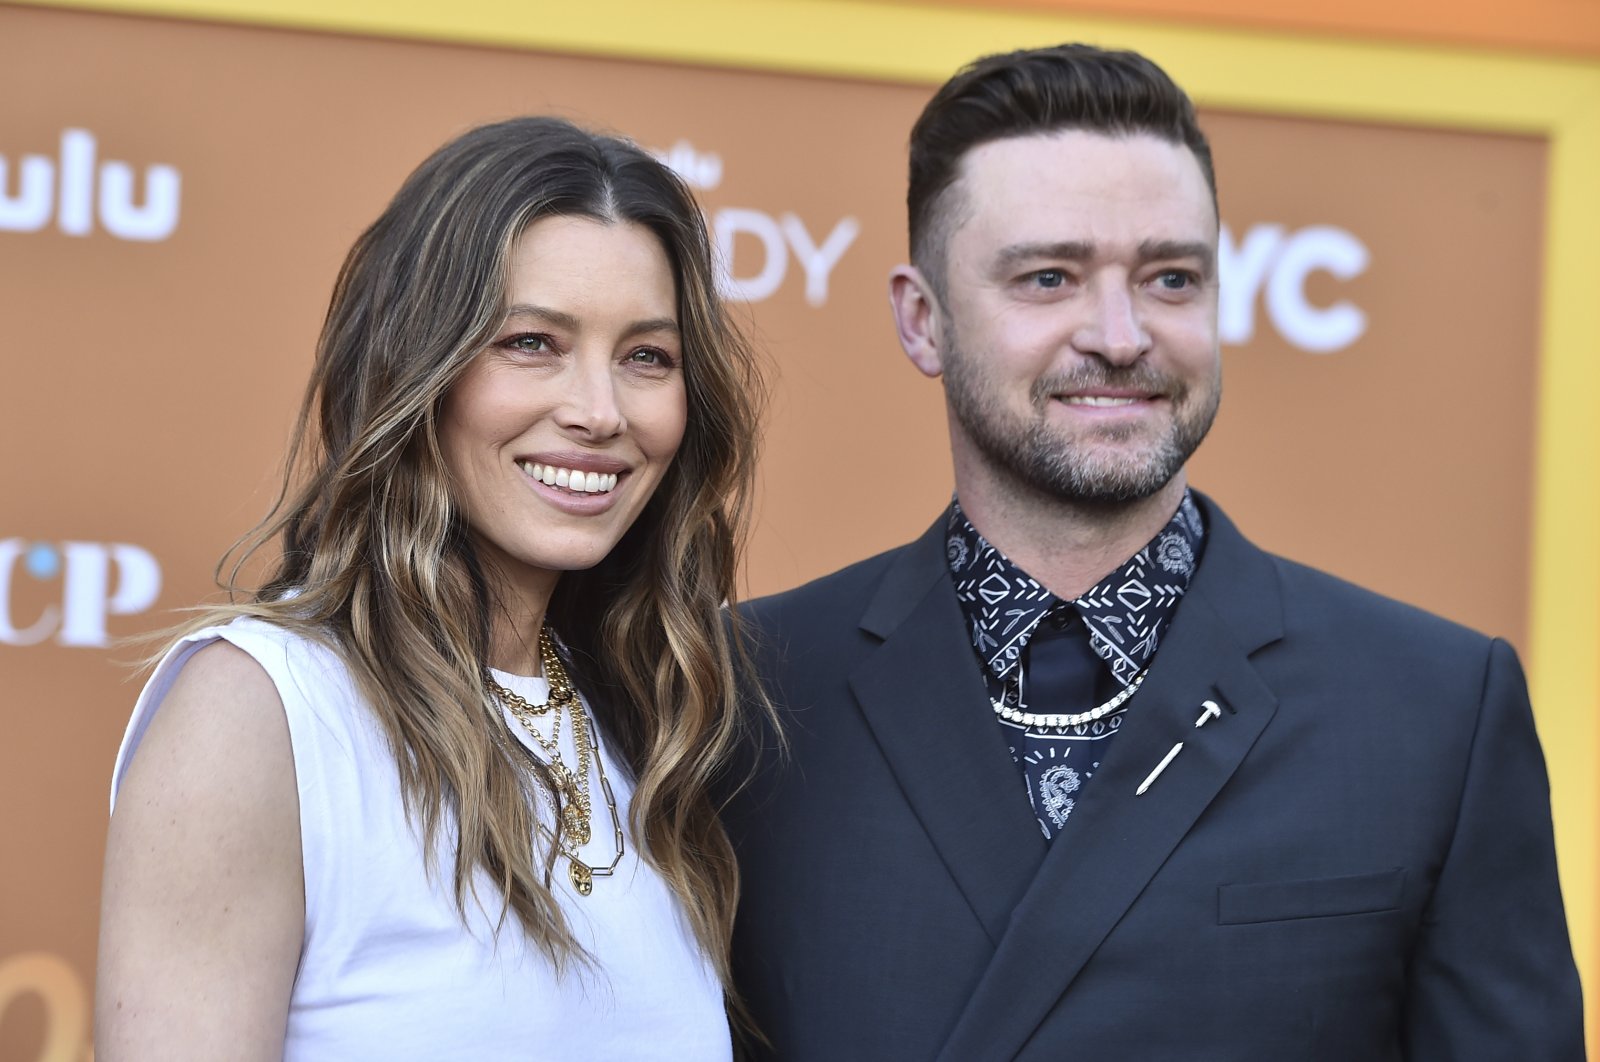 Cast member and executive producer Jessica Biel (L) arrives with her husband, Justin Timberlake, at the premiere of "Candy," Los Angeles, U.S., May 9, 2022. (AP Photo)